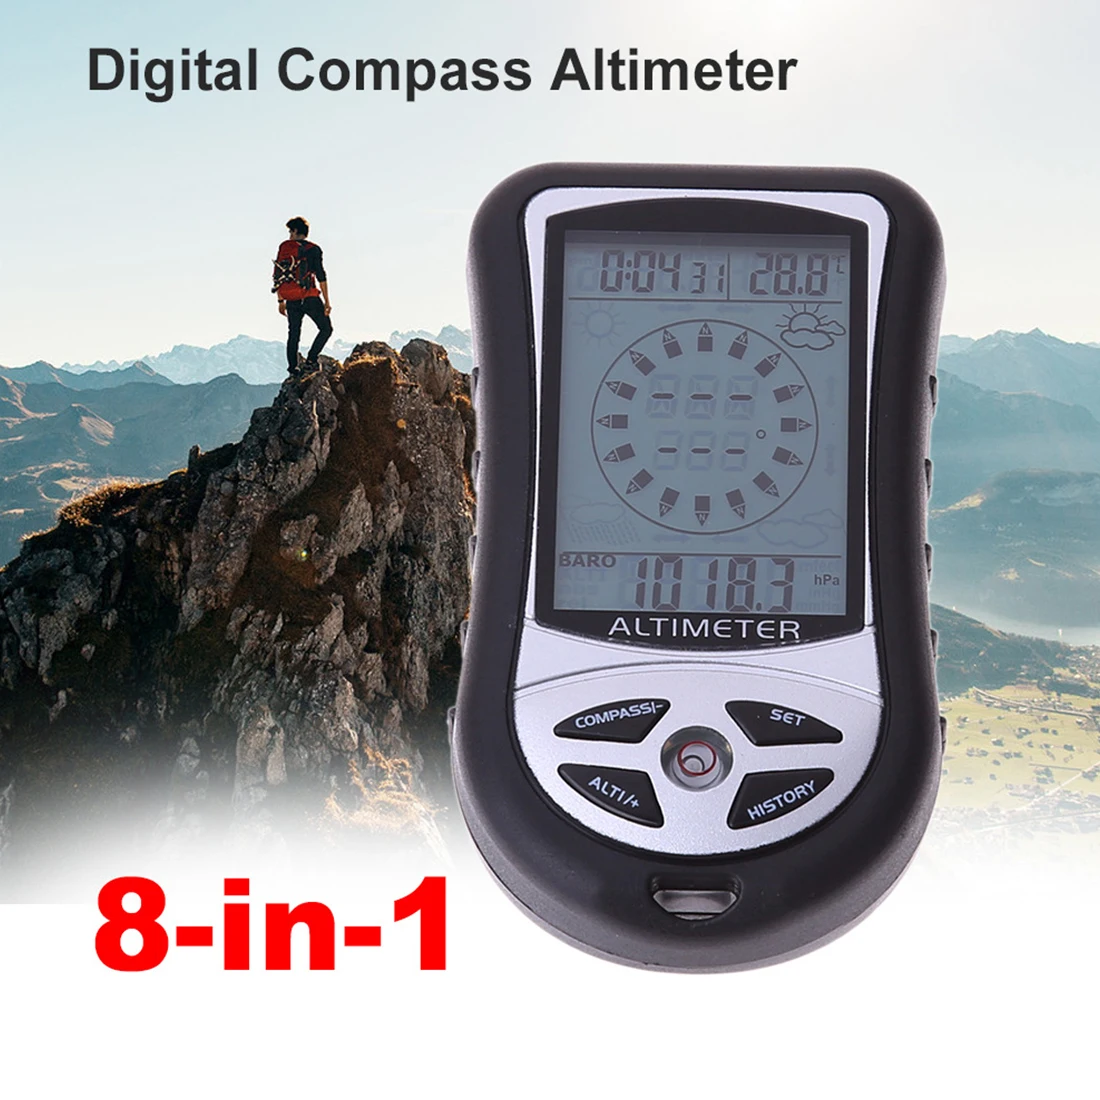 

8 In 1 Digital Compass Altimeter Barometer Thermometer Weather Forecast Height Gauge altitude meter With LCD Backlight